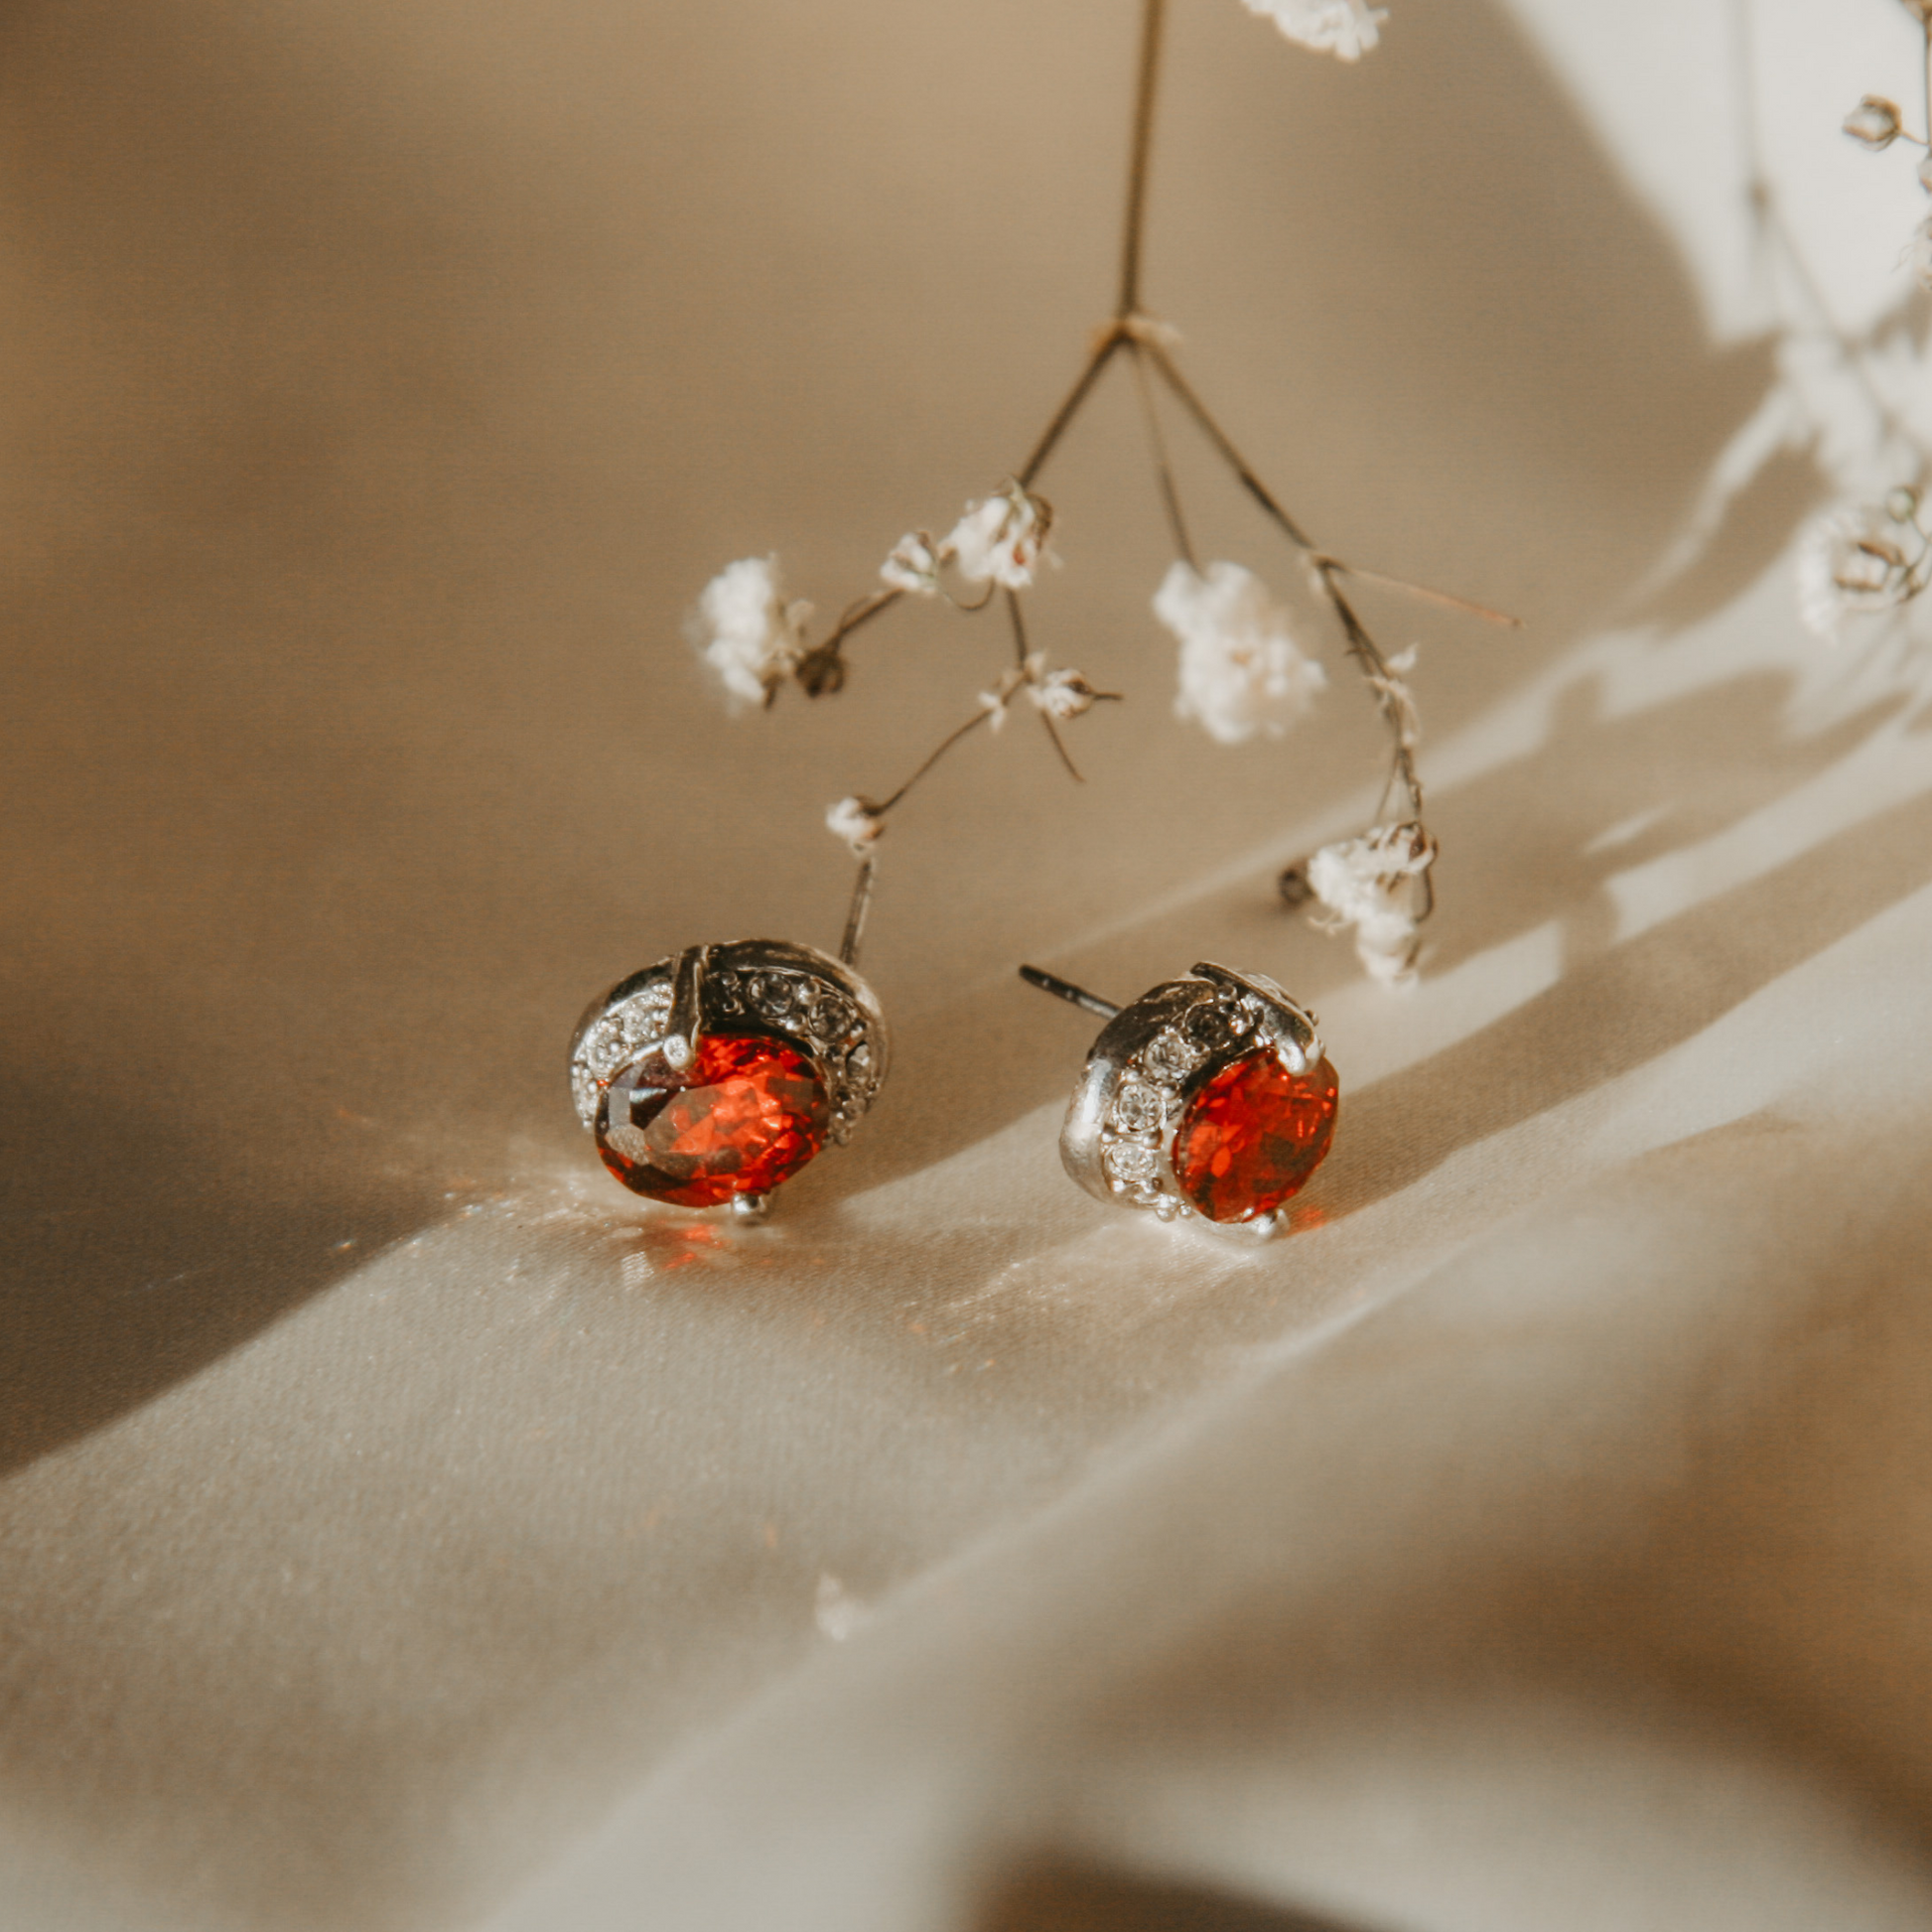 anna karenina vintage earrings by Avery Faye bookish and literature inspired jewellery